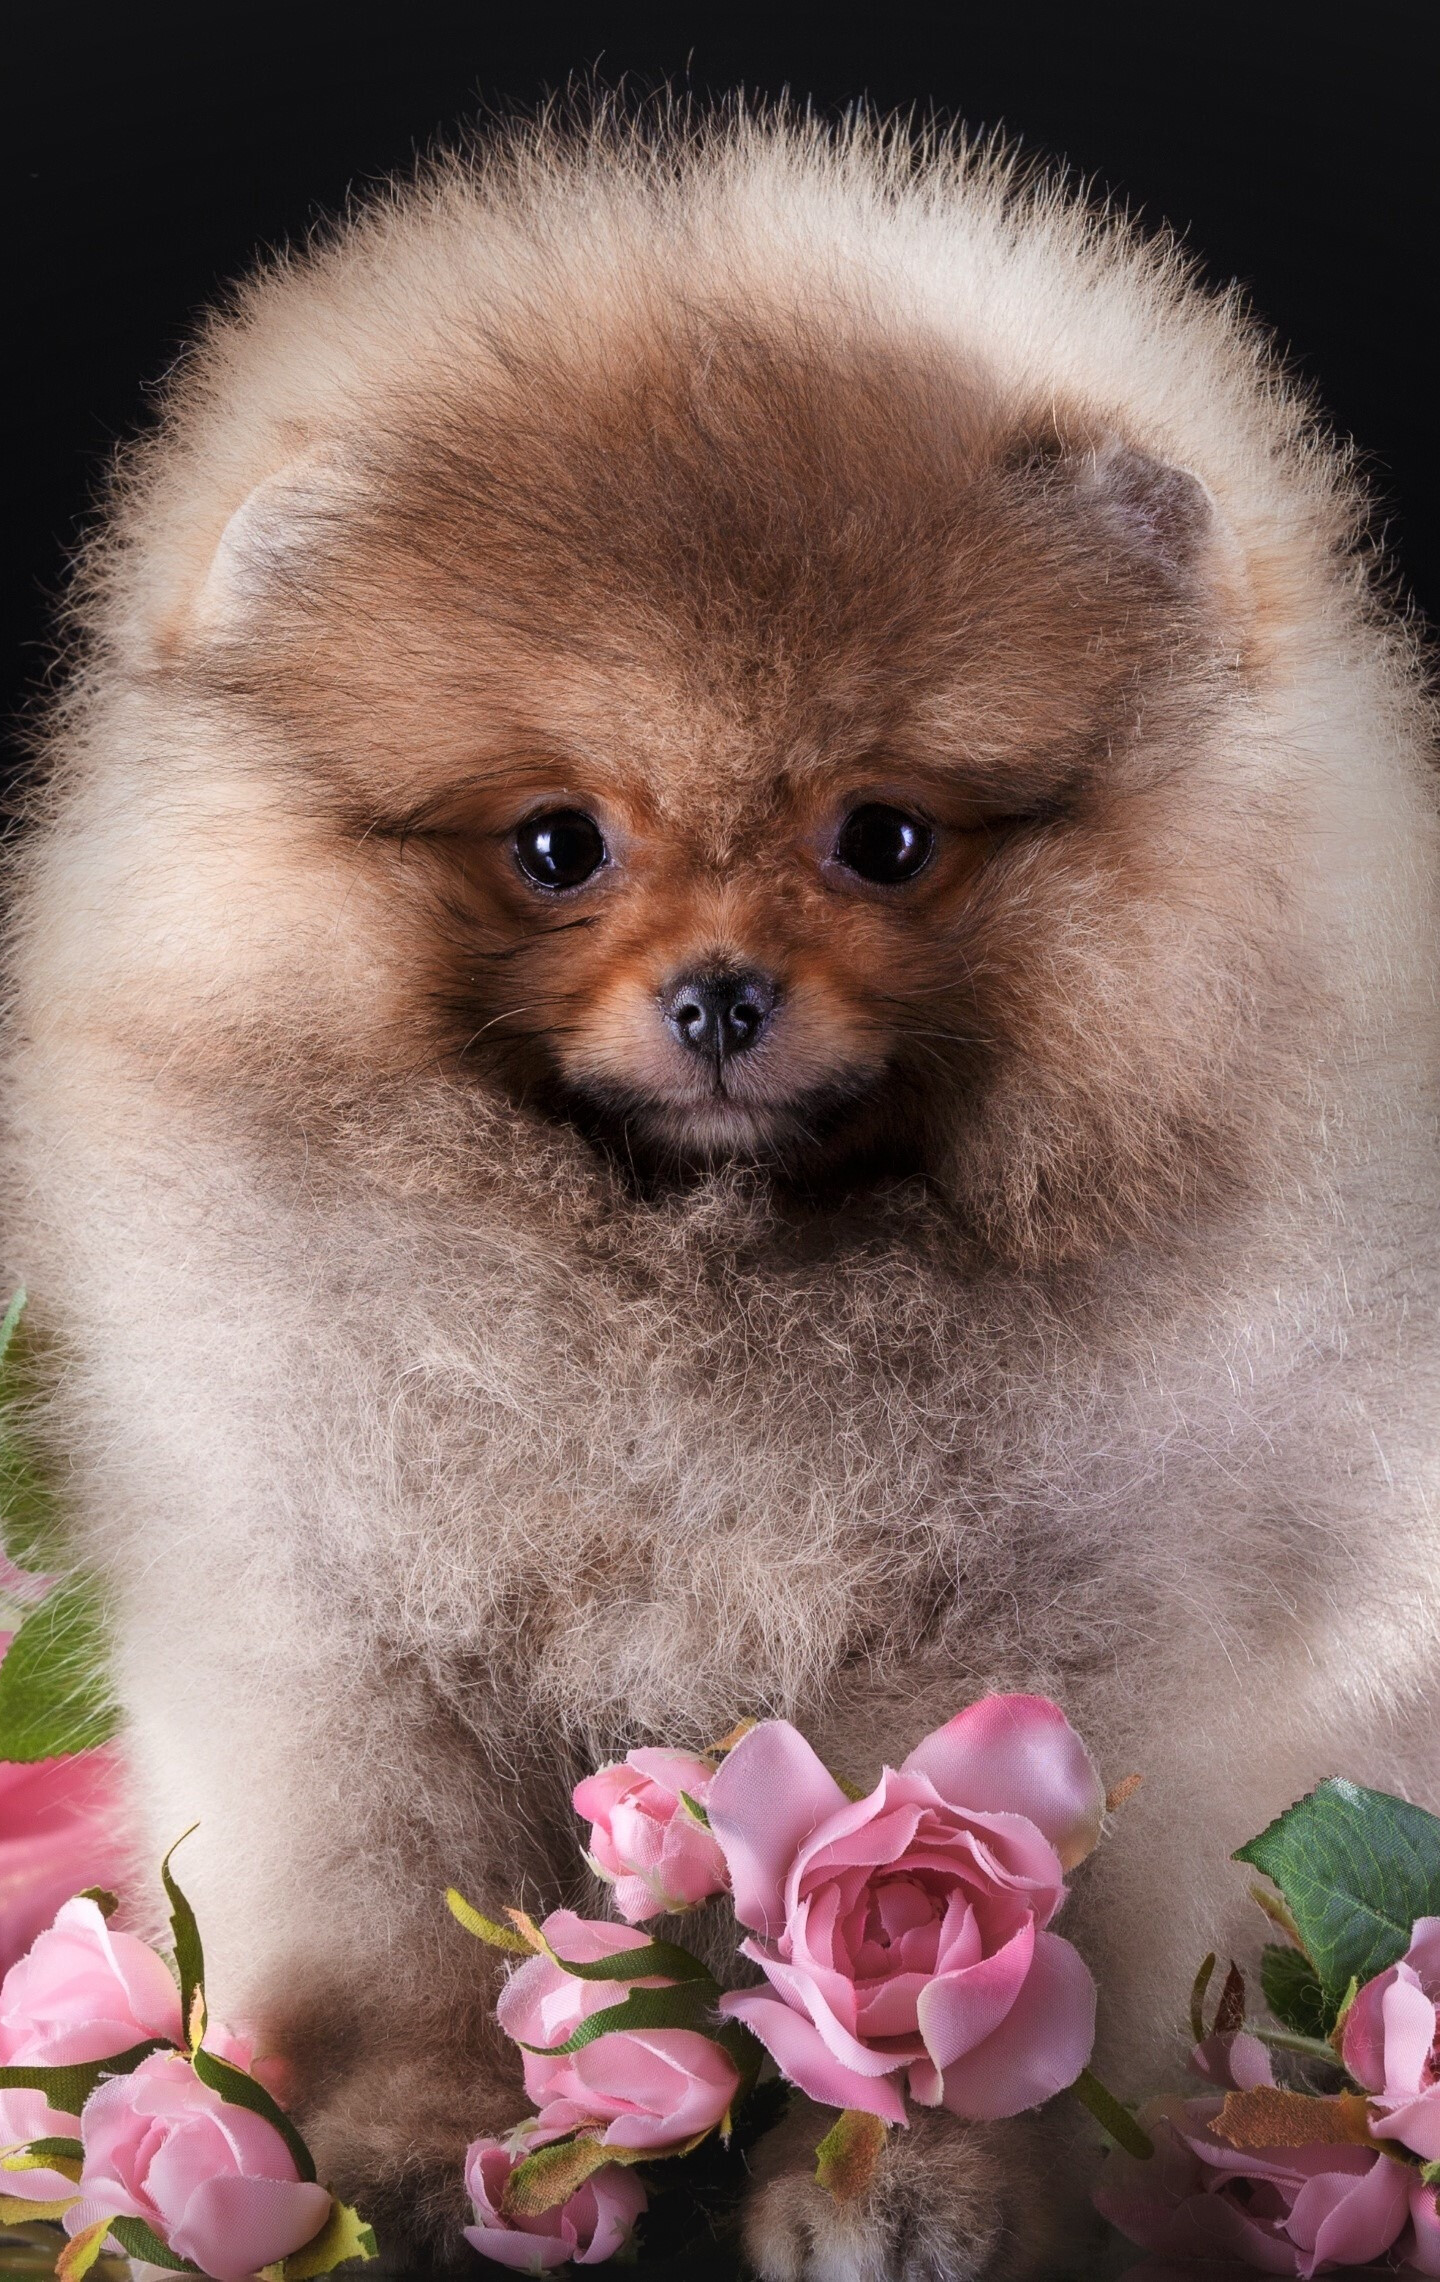 Pomeranian: Spitz, Cute dog, Furry, Animal, A small but energetic breed of dog. 1440x2290 HD Wallpaper.